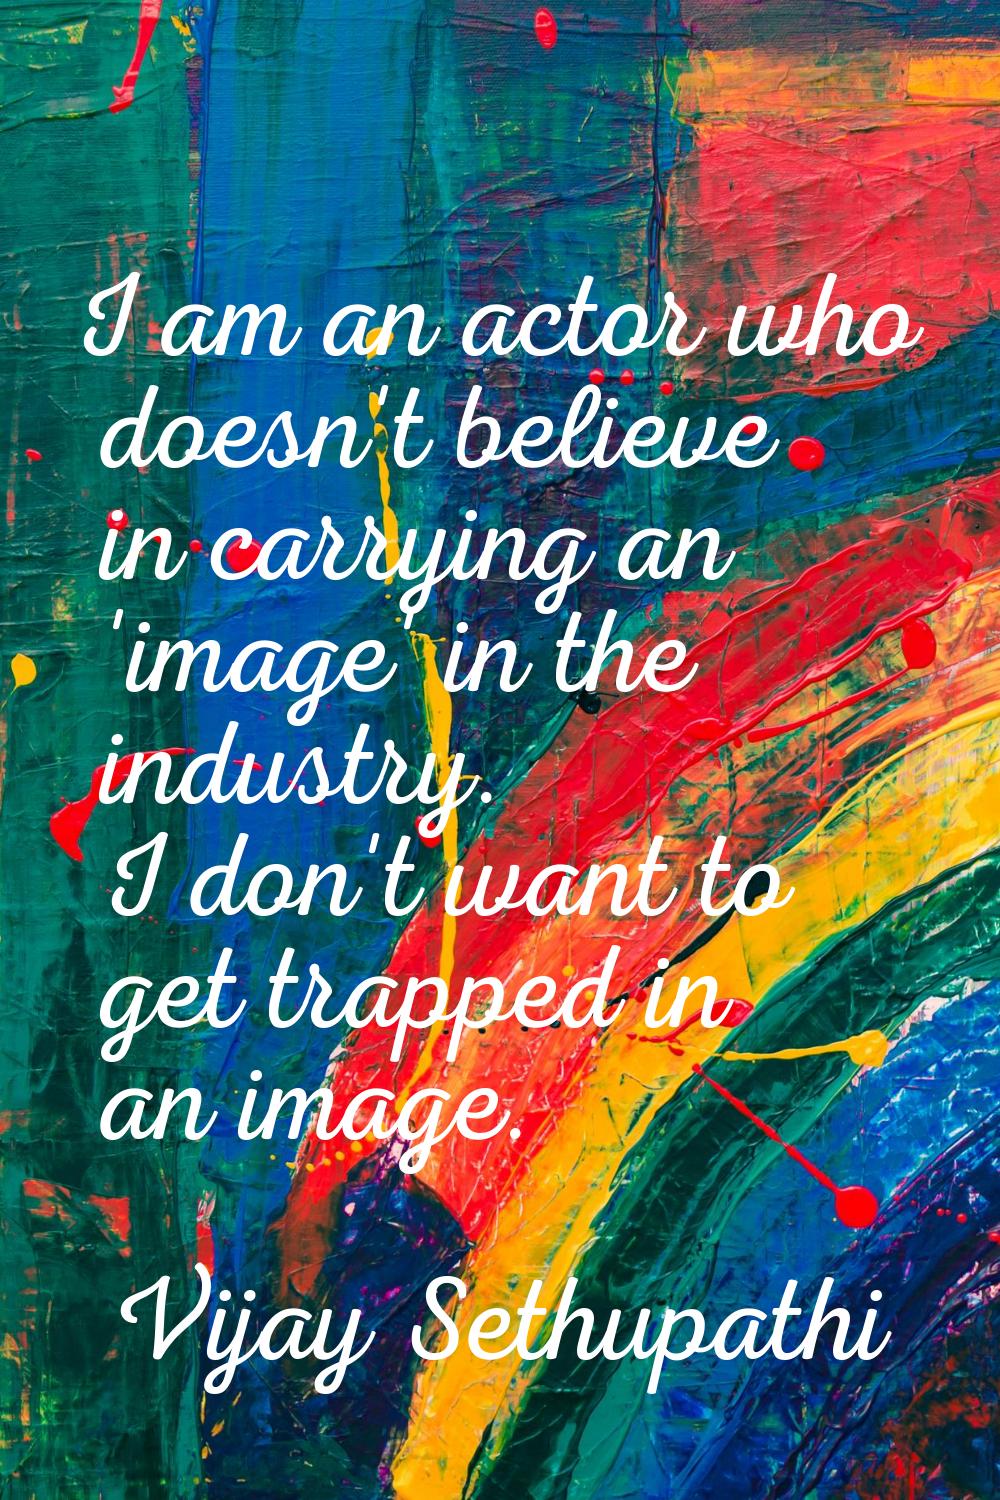 I am an actor who doesn't believe in carrying an 'image' in the industry. I don't want to get trapp